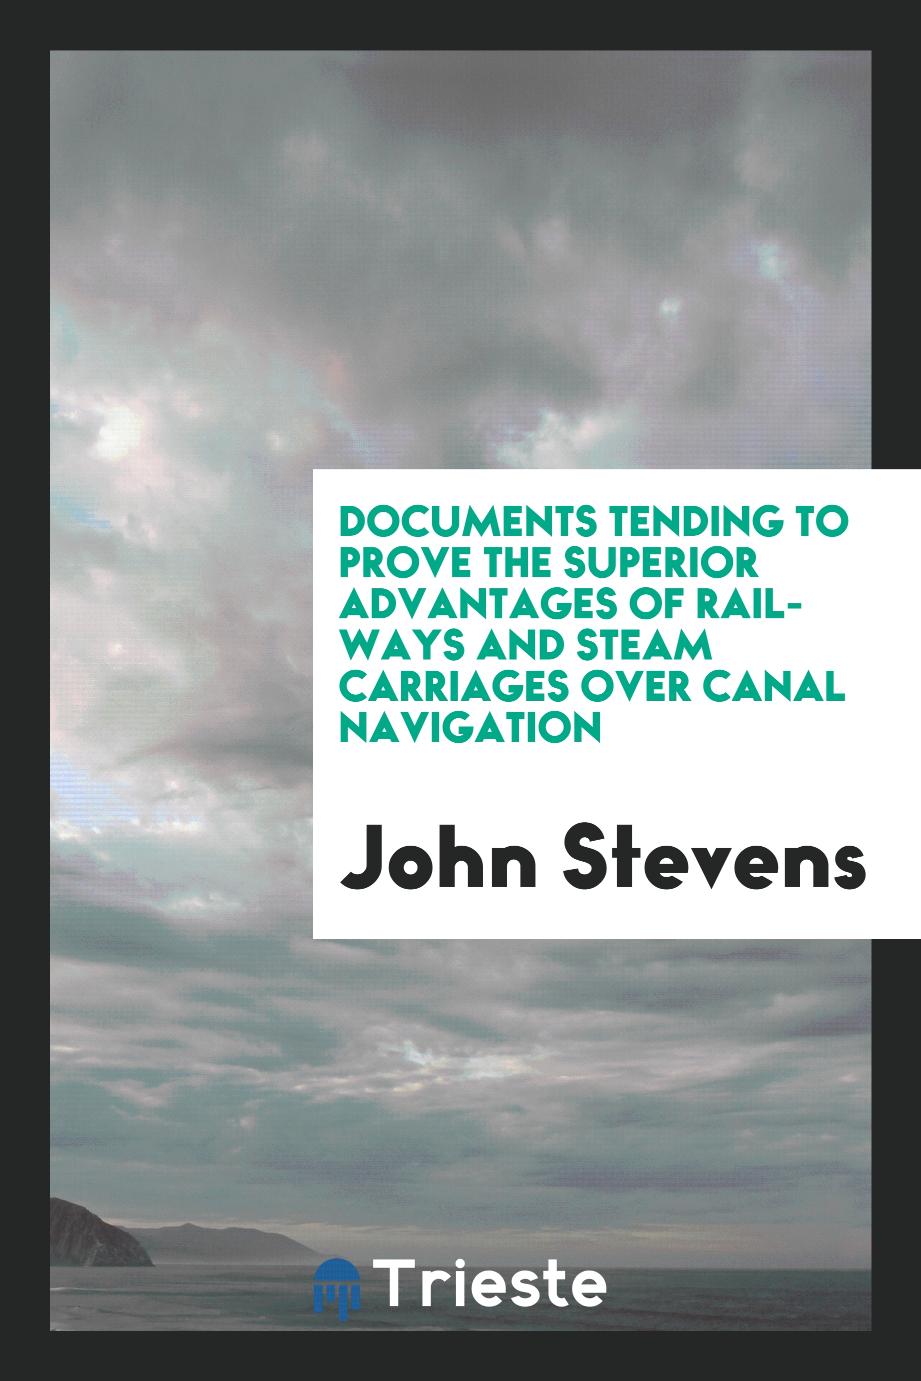 Documents tending to prove the superior advantages of rail-ways and steam carriages over canal navigation